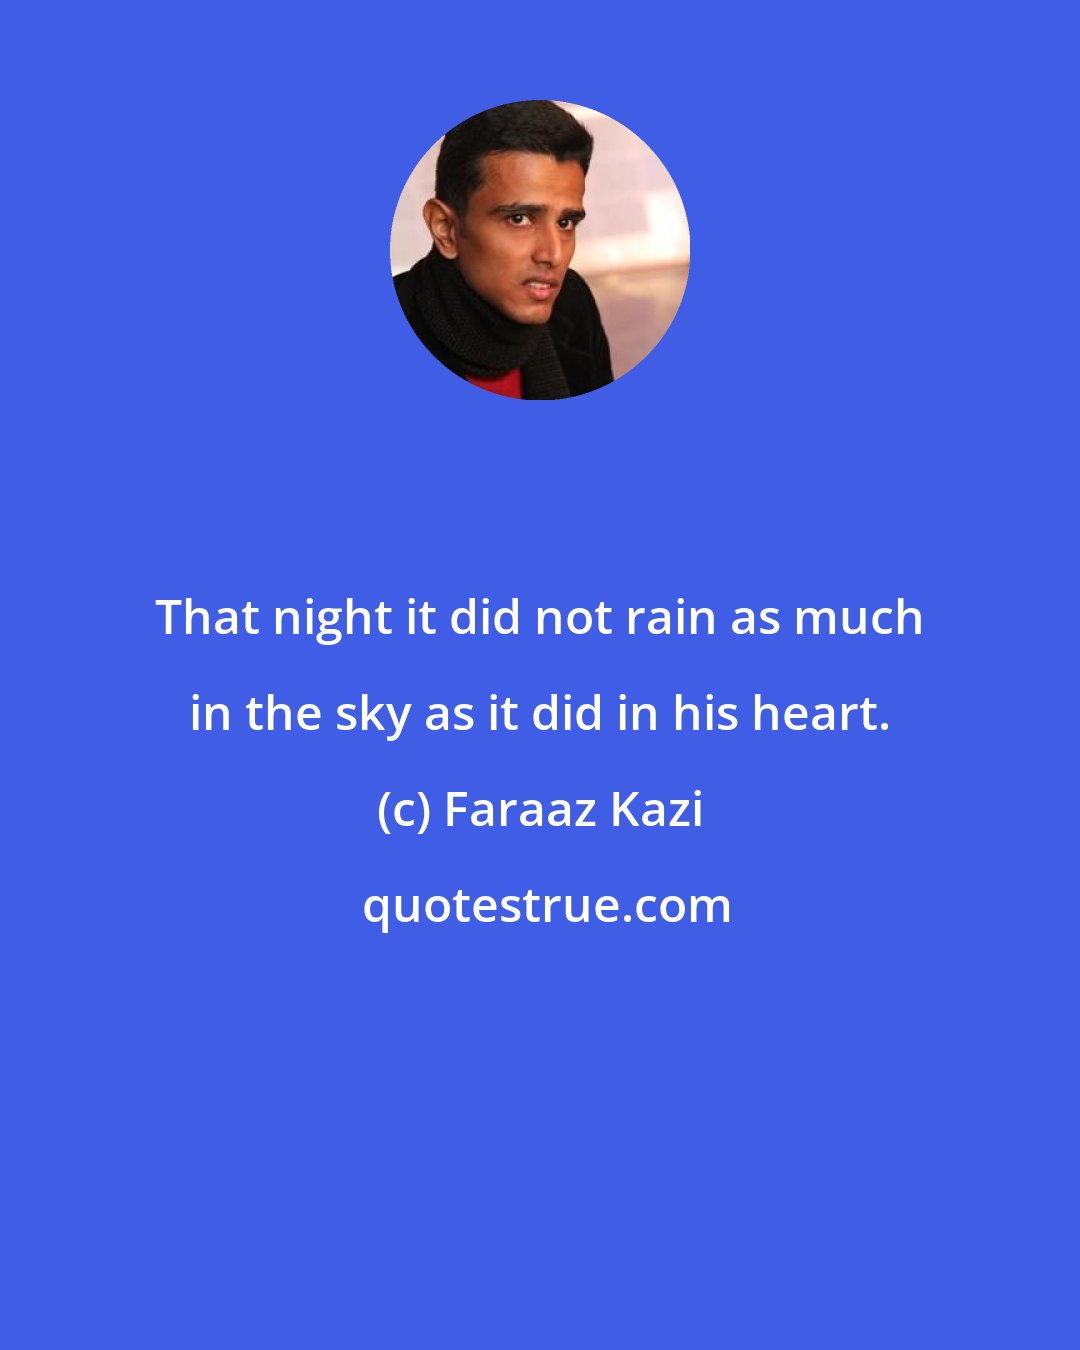 Faraaz Kazi: That night it did not rain as much in the sky as it did in his heart.